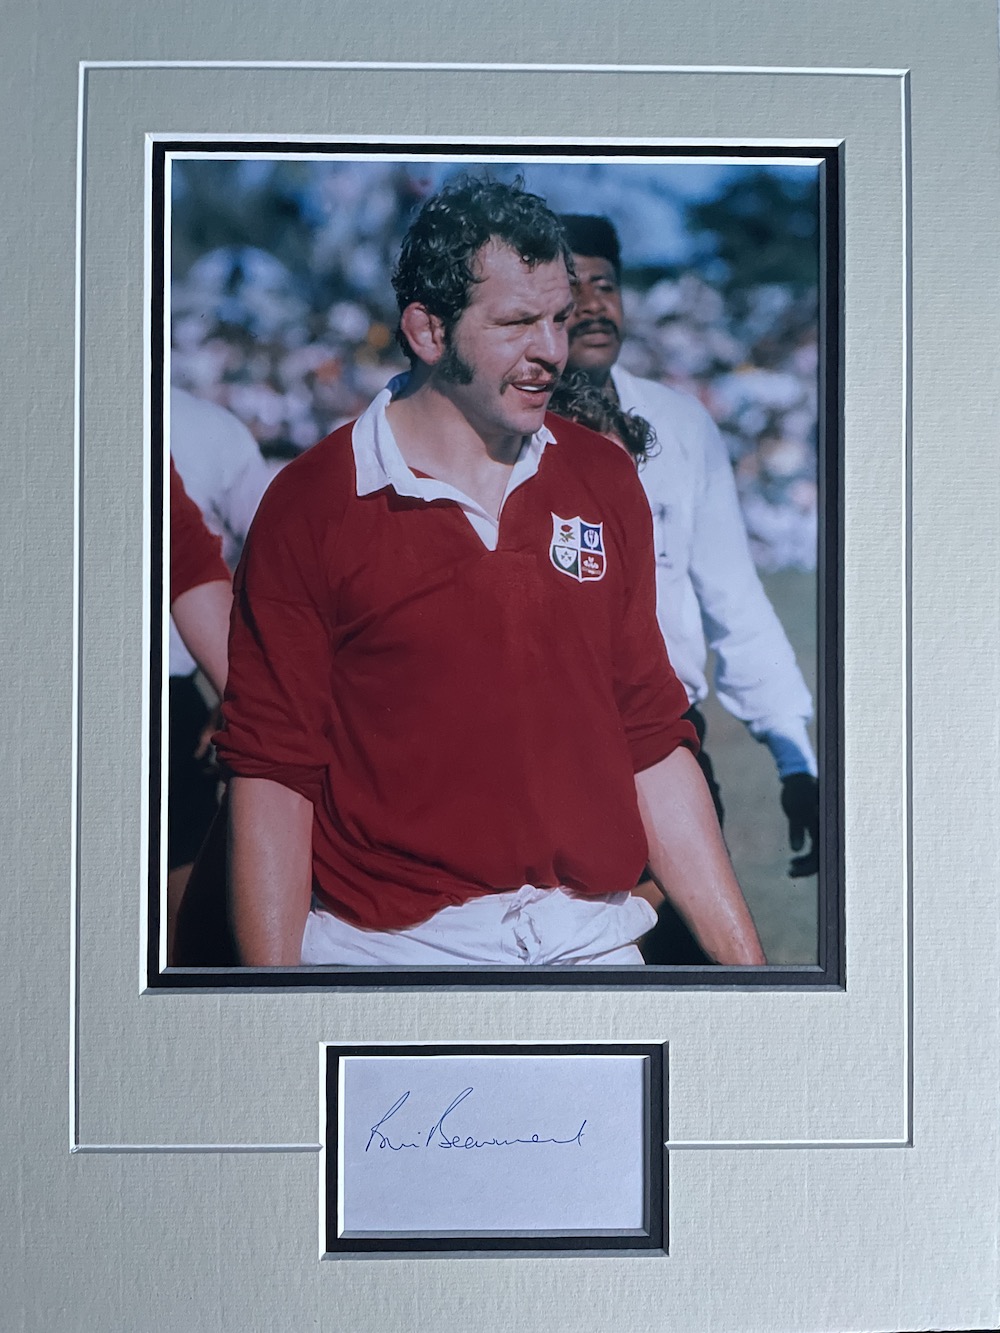 Bill Beaumont England and British Lions Player Signed Display. Good Condition. All autographs come